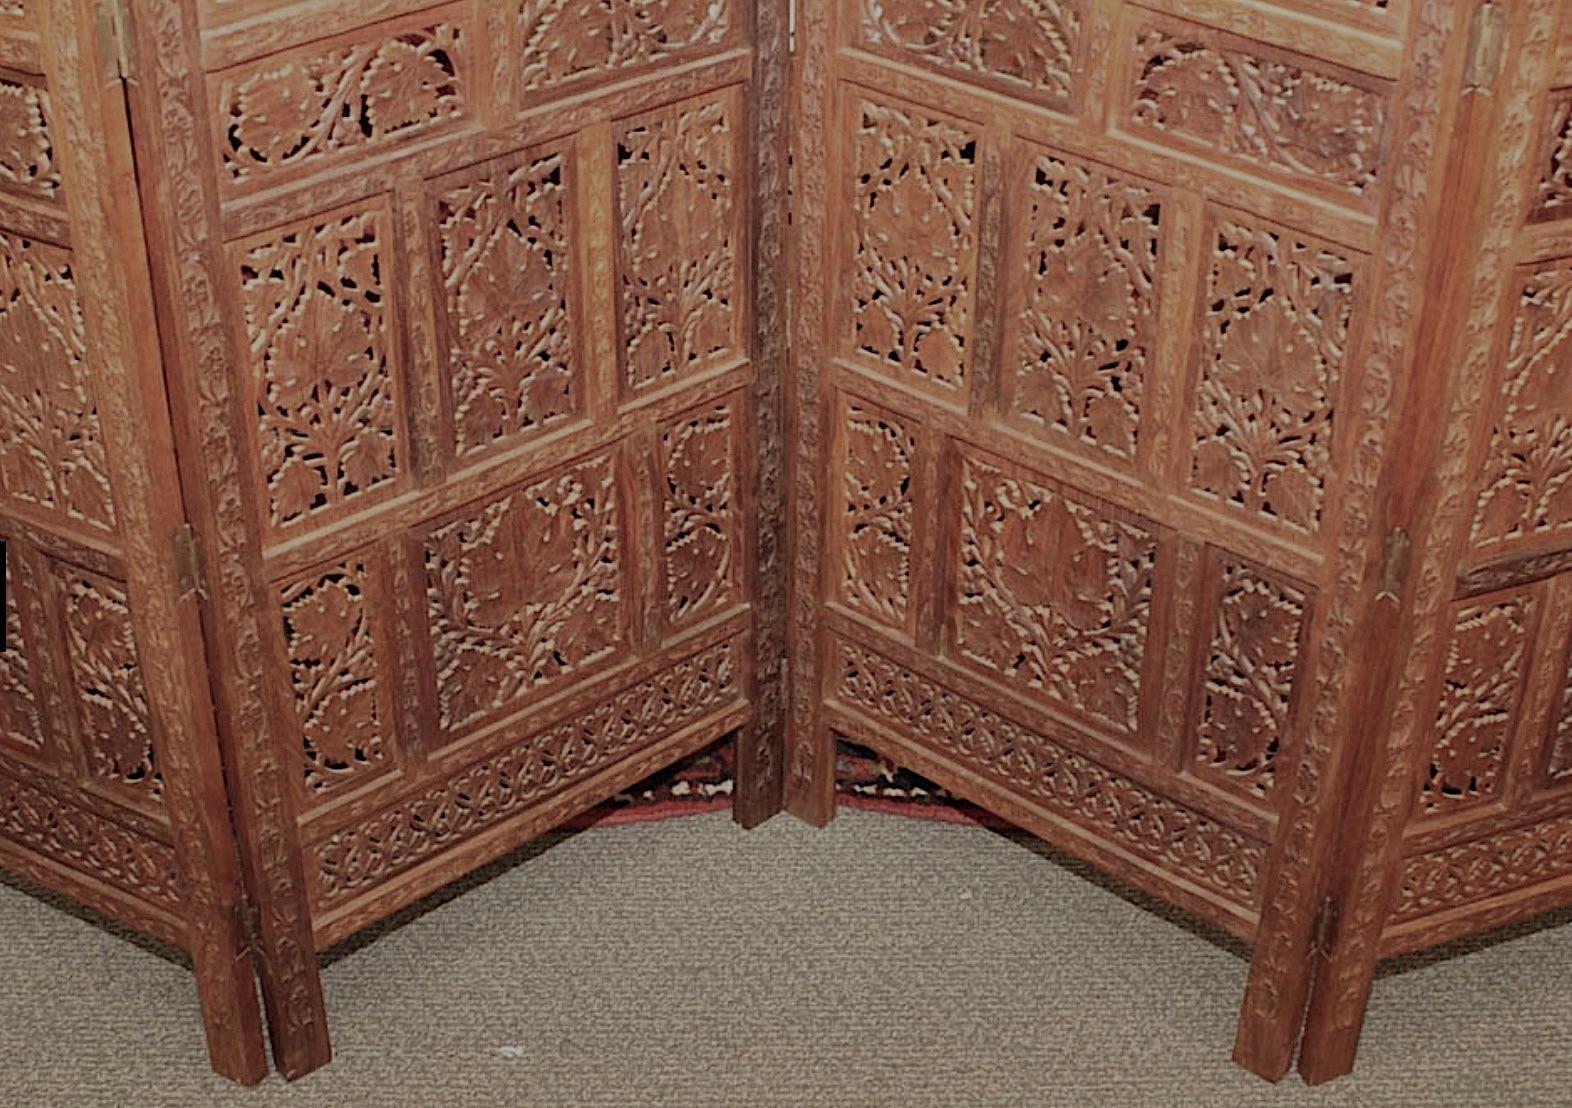 Anglo Indian 4-Panel Handcrafted Teak Wood Screen, Circa 1900s For Sale 1